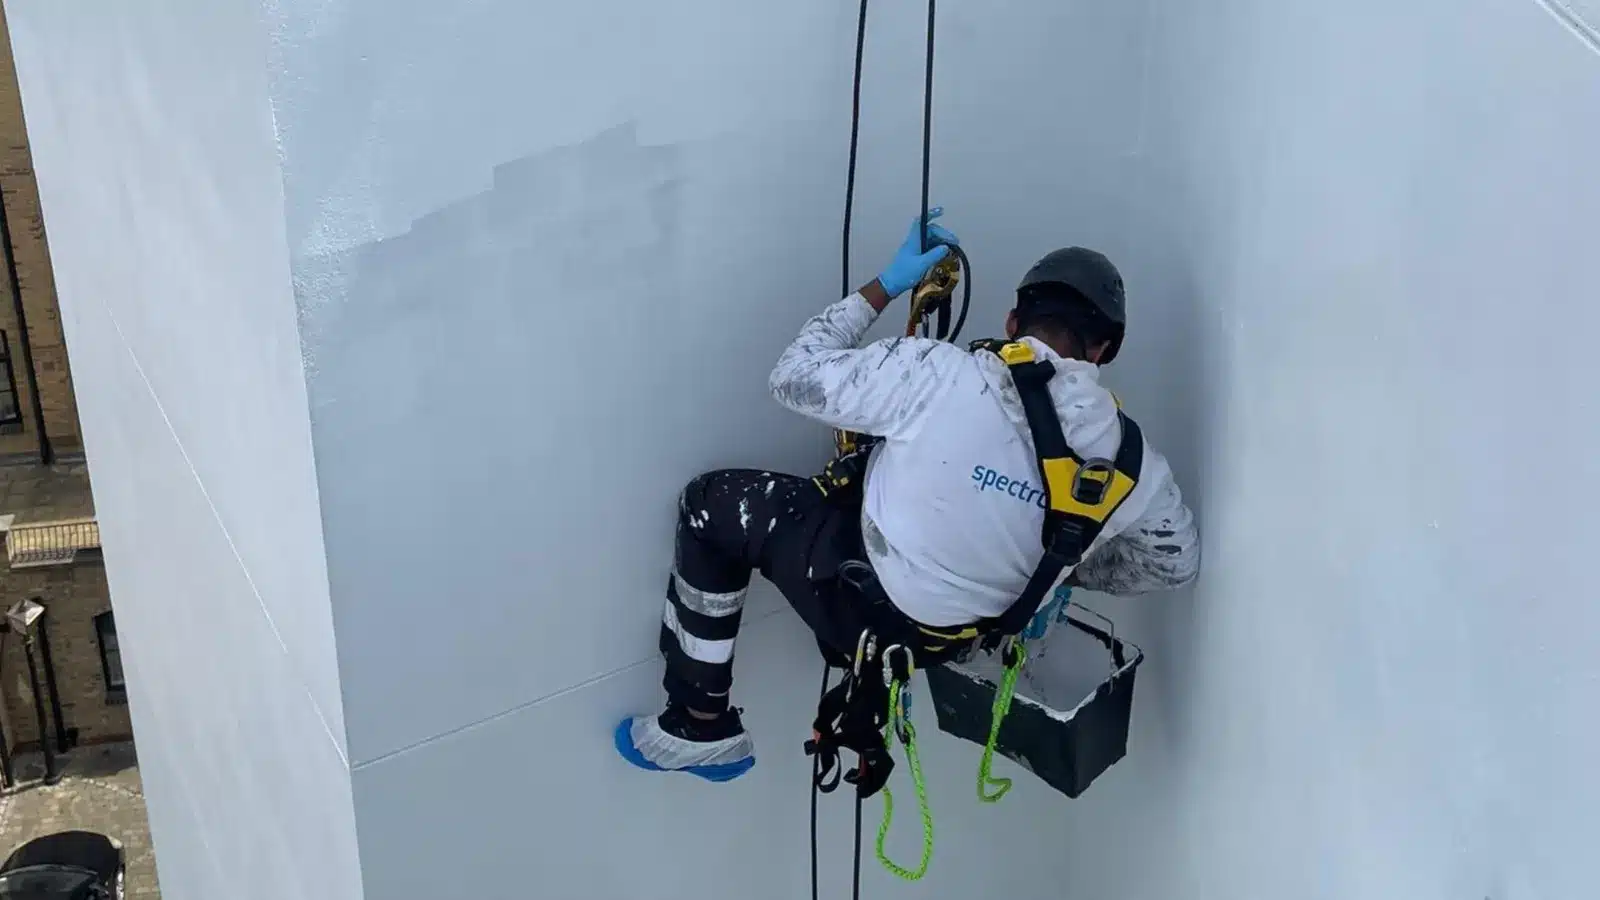 5 Rope Access Techniques in the Industry